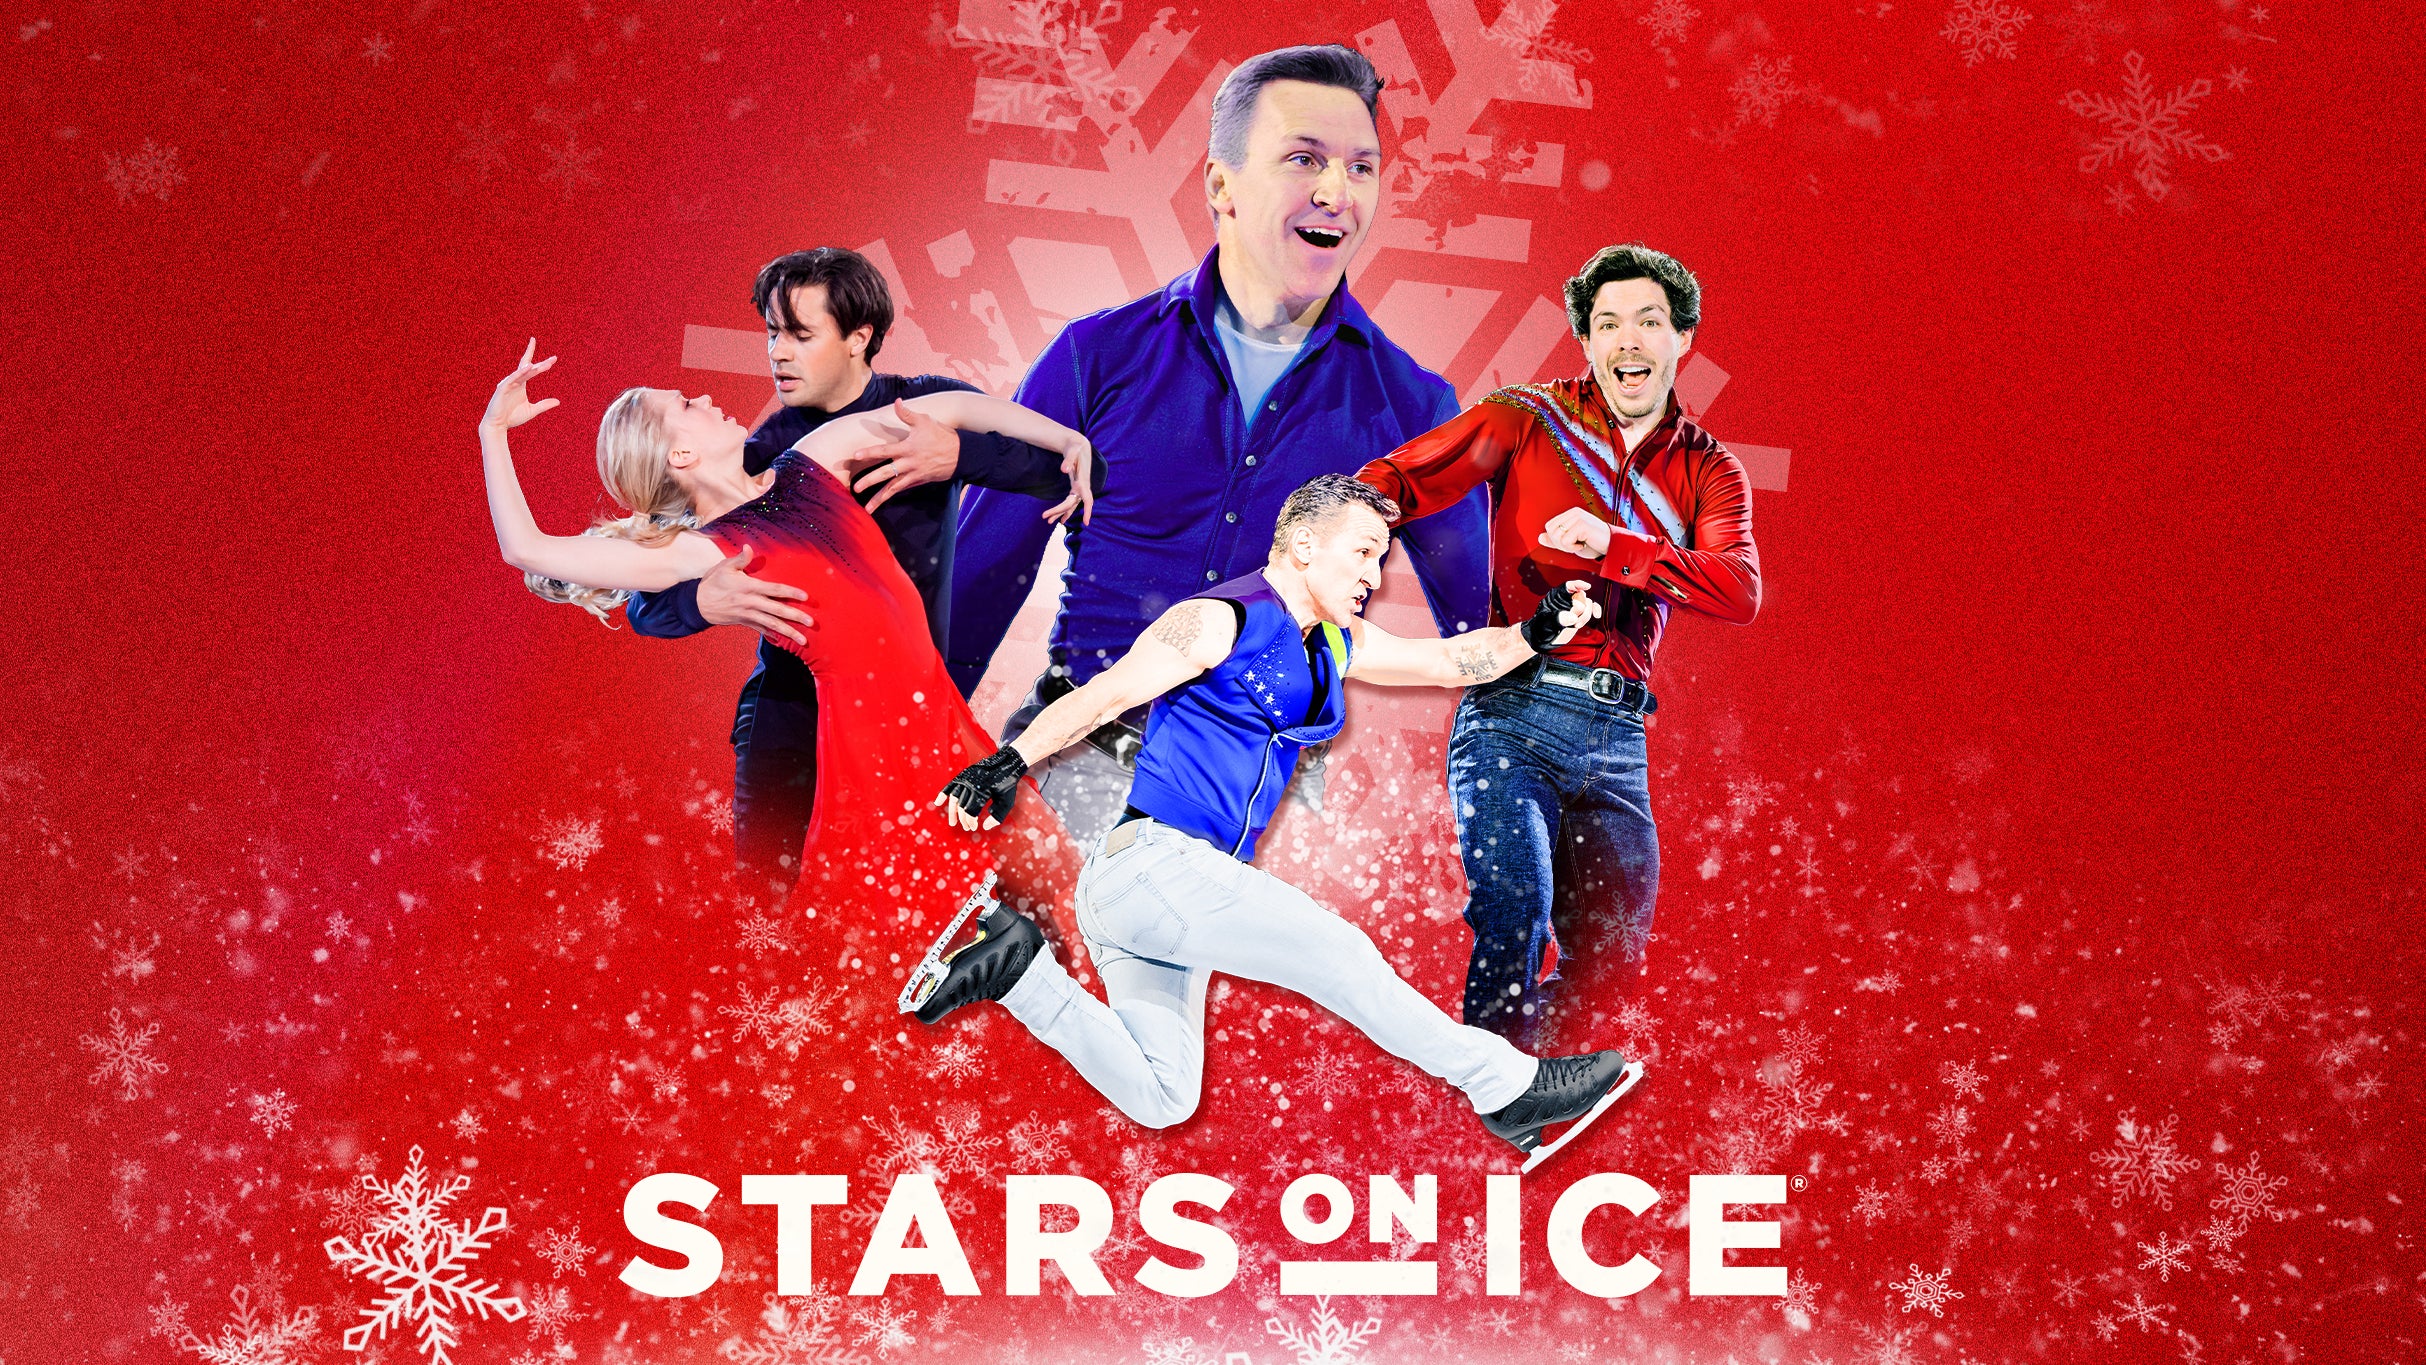 Stars On Ice Holiday - U.S. free presale listing for show tickets in Duluth, MN (AMSOIL Arena)